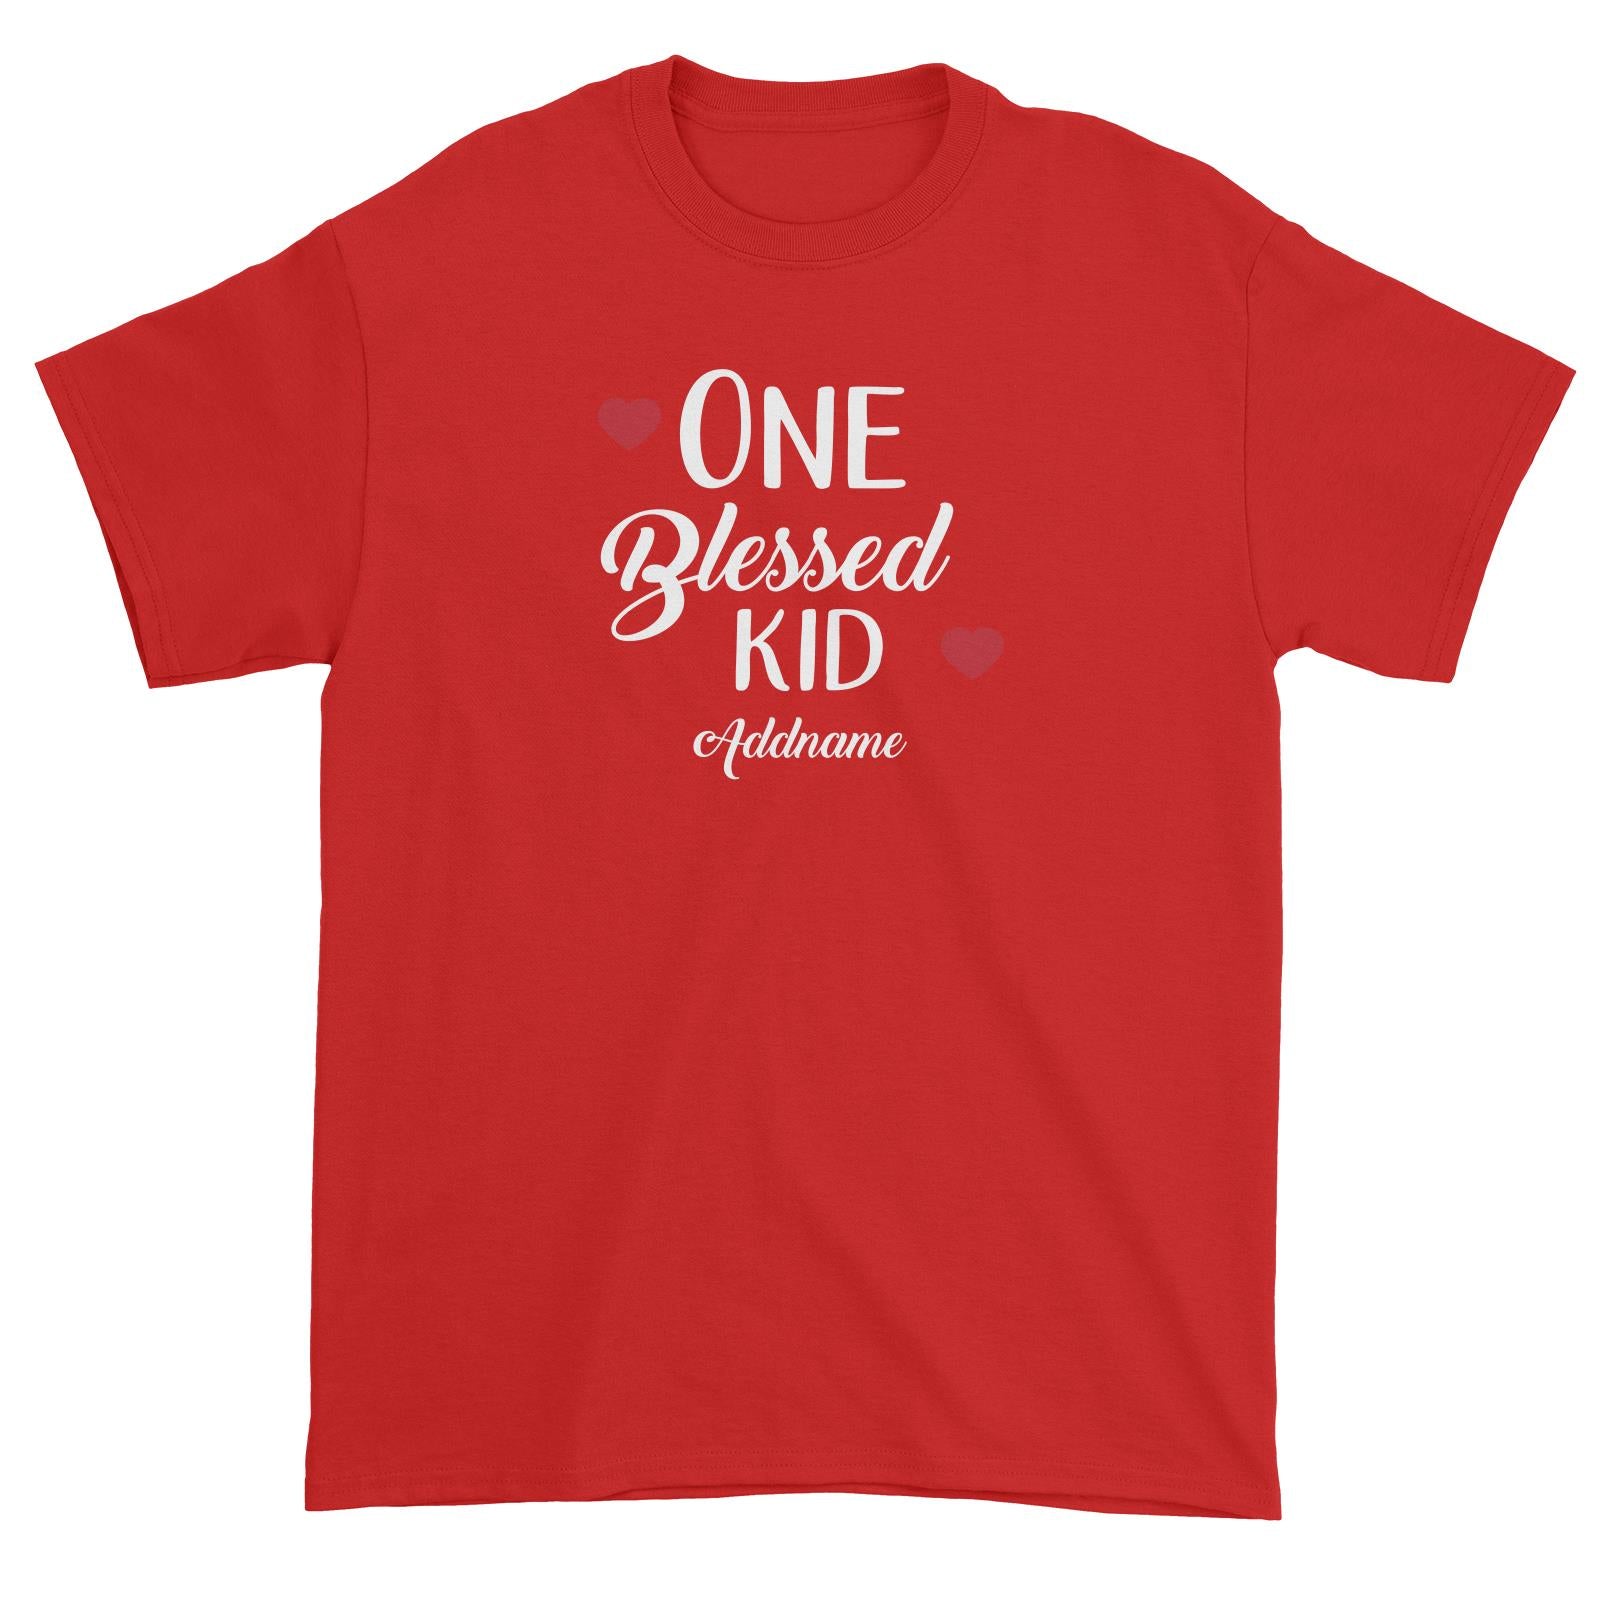 Christian Series One Blessed Kid Addname Unisex T-Shirt